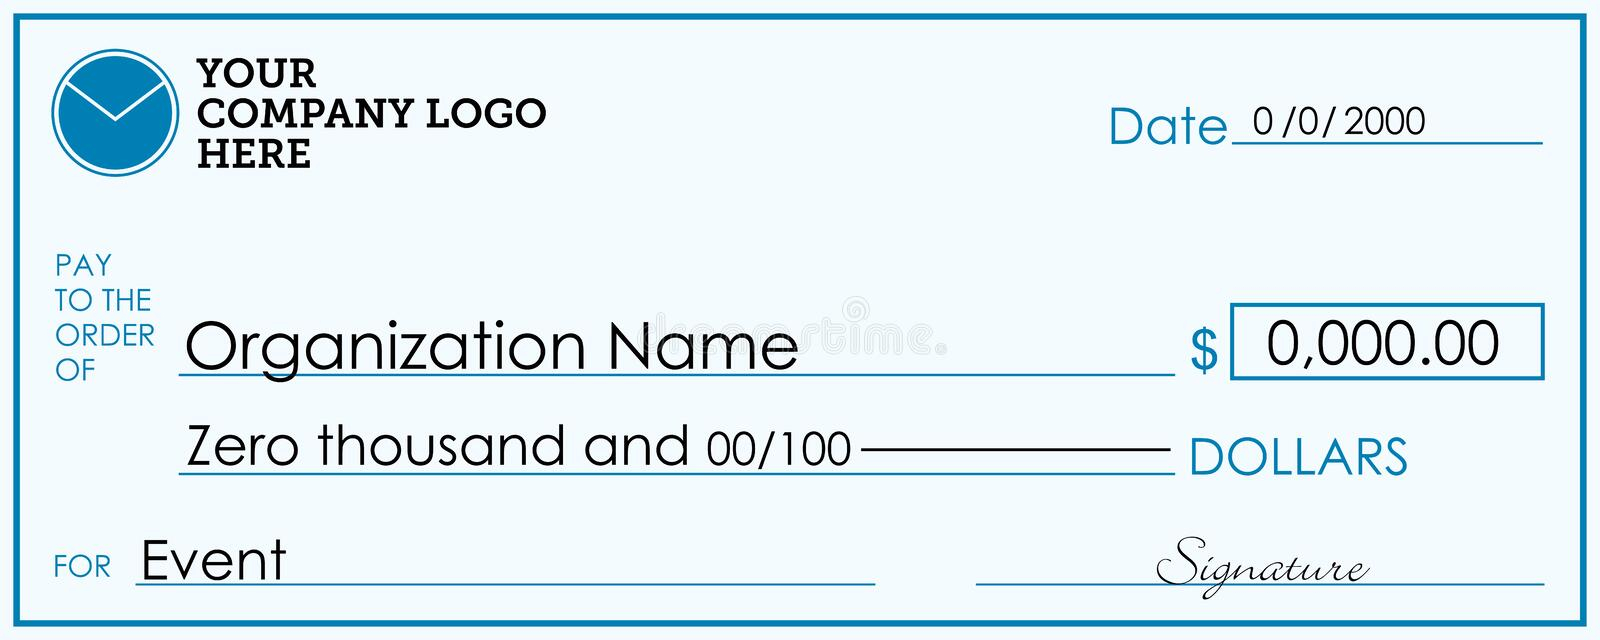 Large Presentation Check Template  Giant Check For Fundraisers  Intended For Large Blank Cheque Template